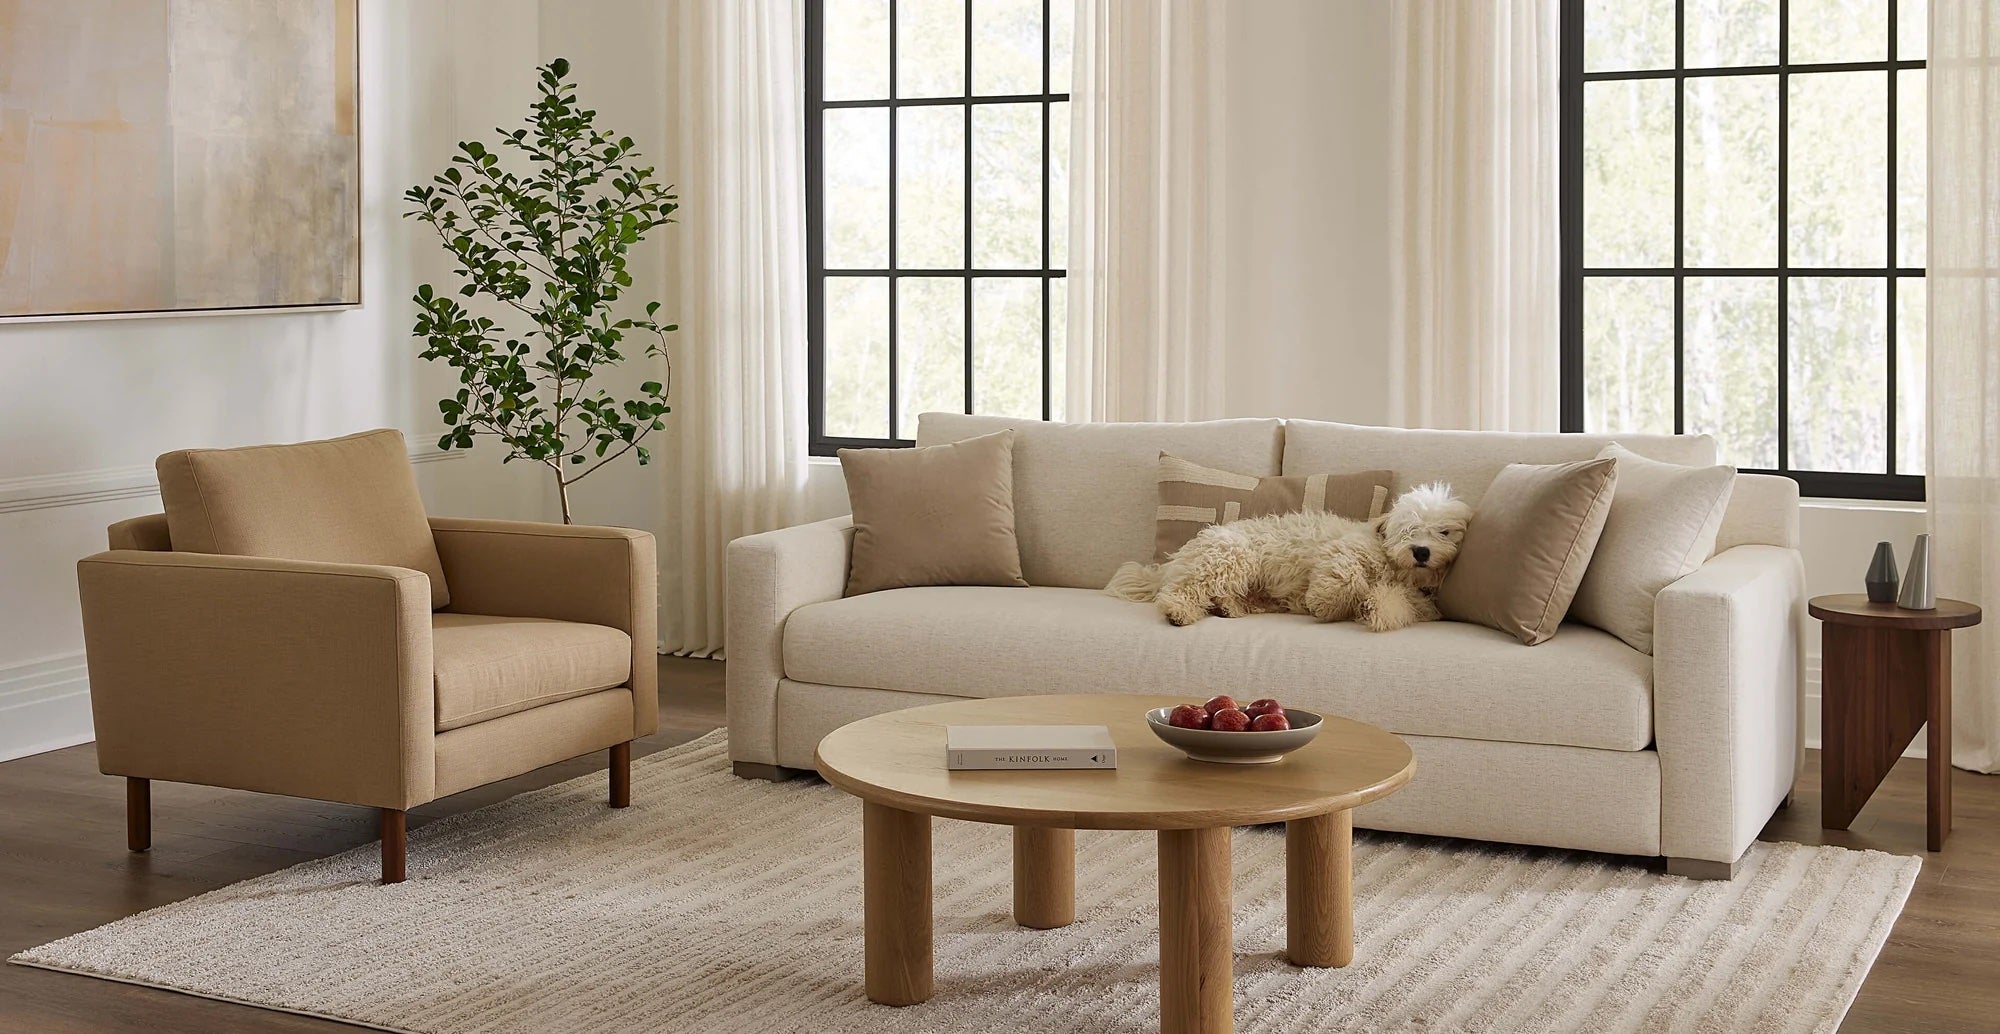 A cozy living room with a beige sofa, light brown cushions, and a fluffy white dog lying on it. A matching armchair sits to the left. A round wooden coffee table with books and a bowl of apples is in front. The room has large windows with sheer curtains and a potted plant.